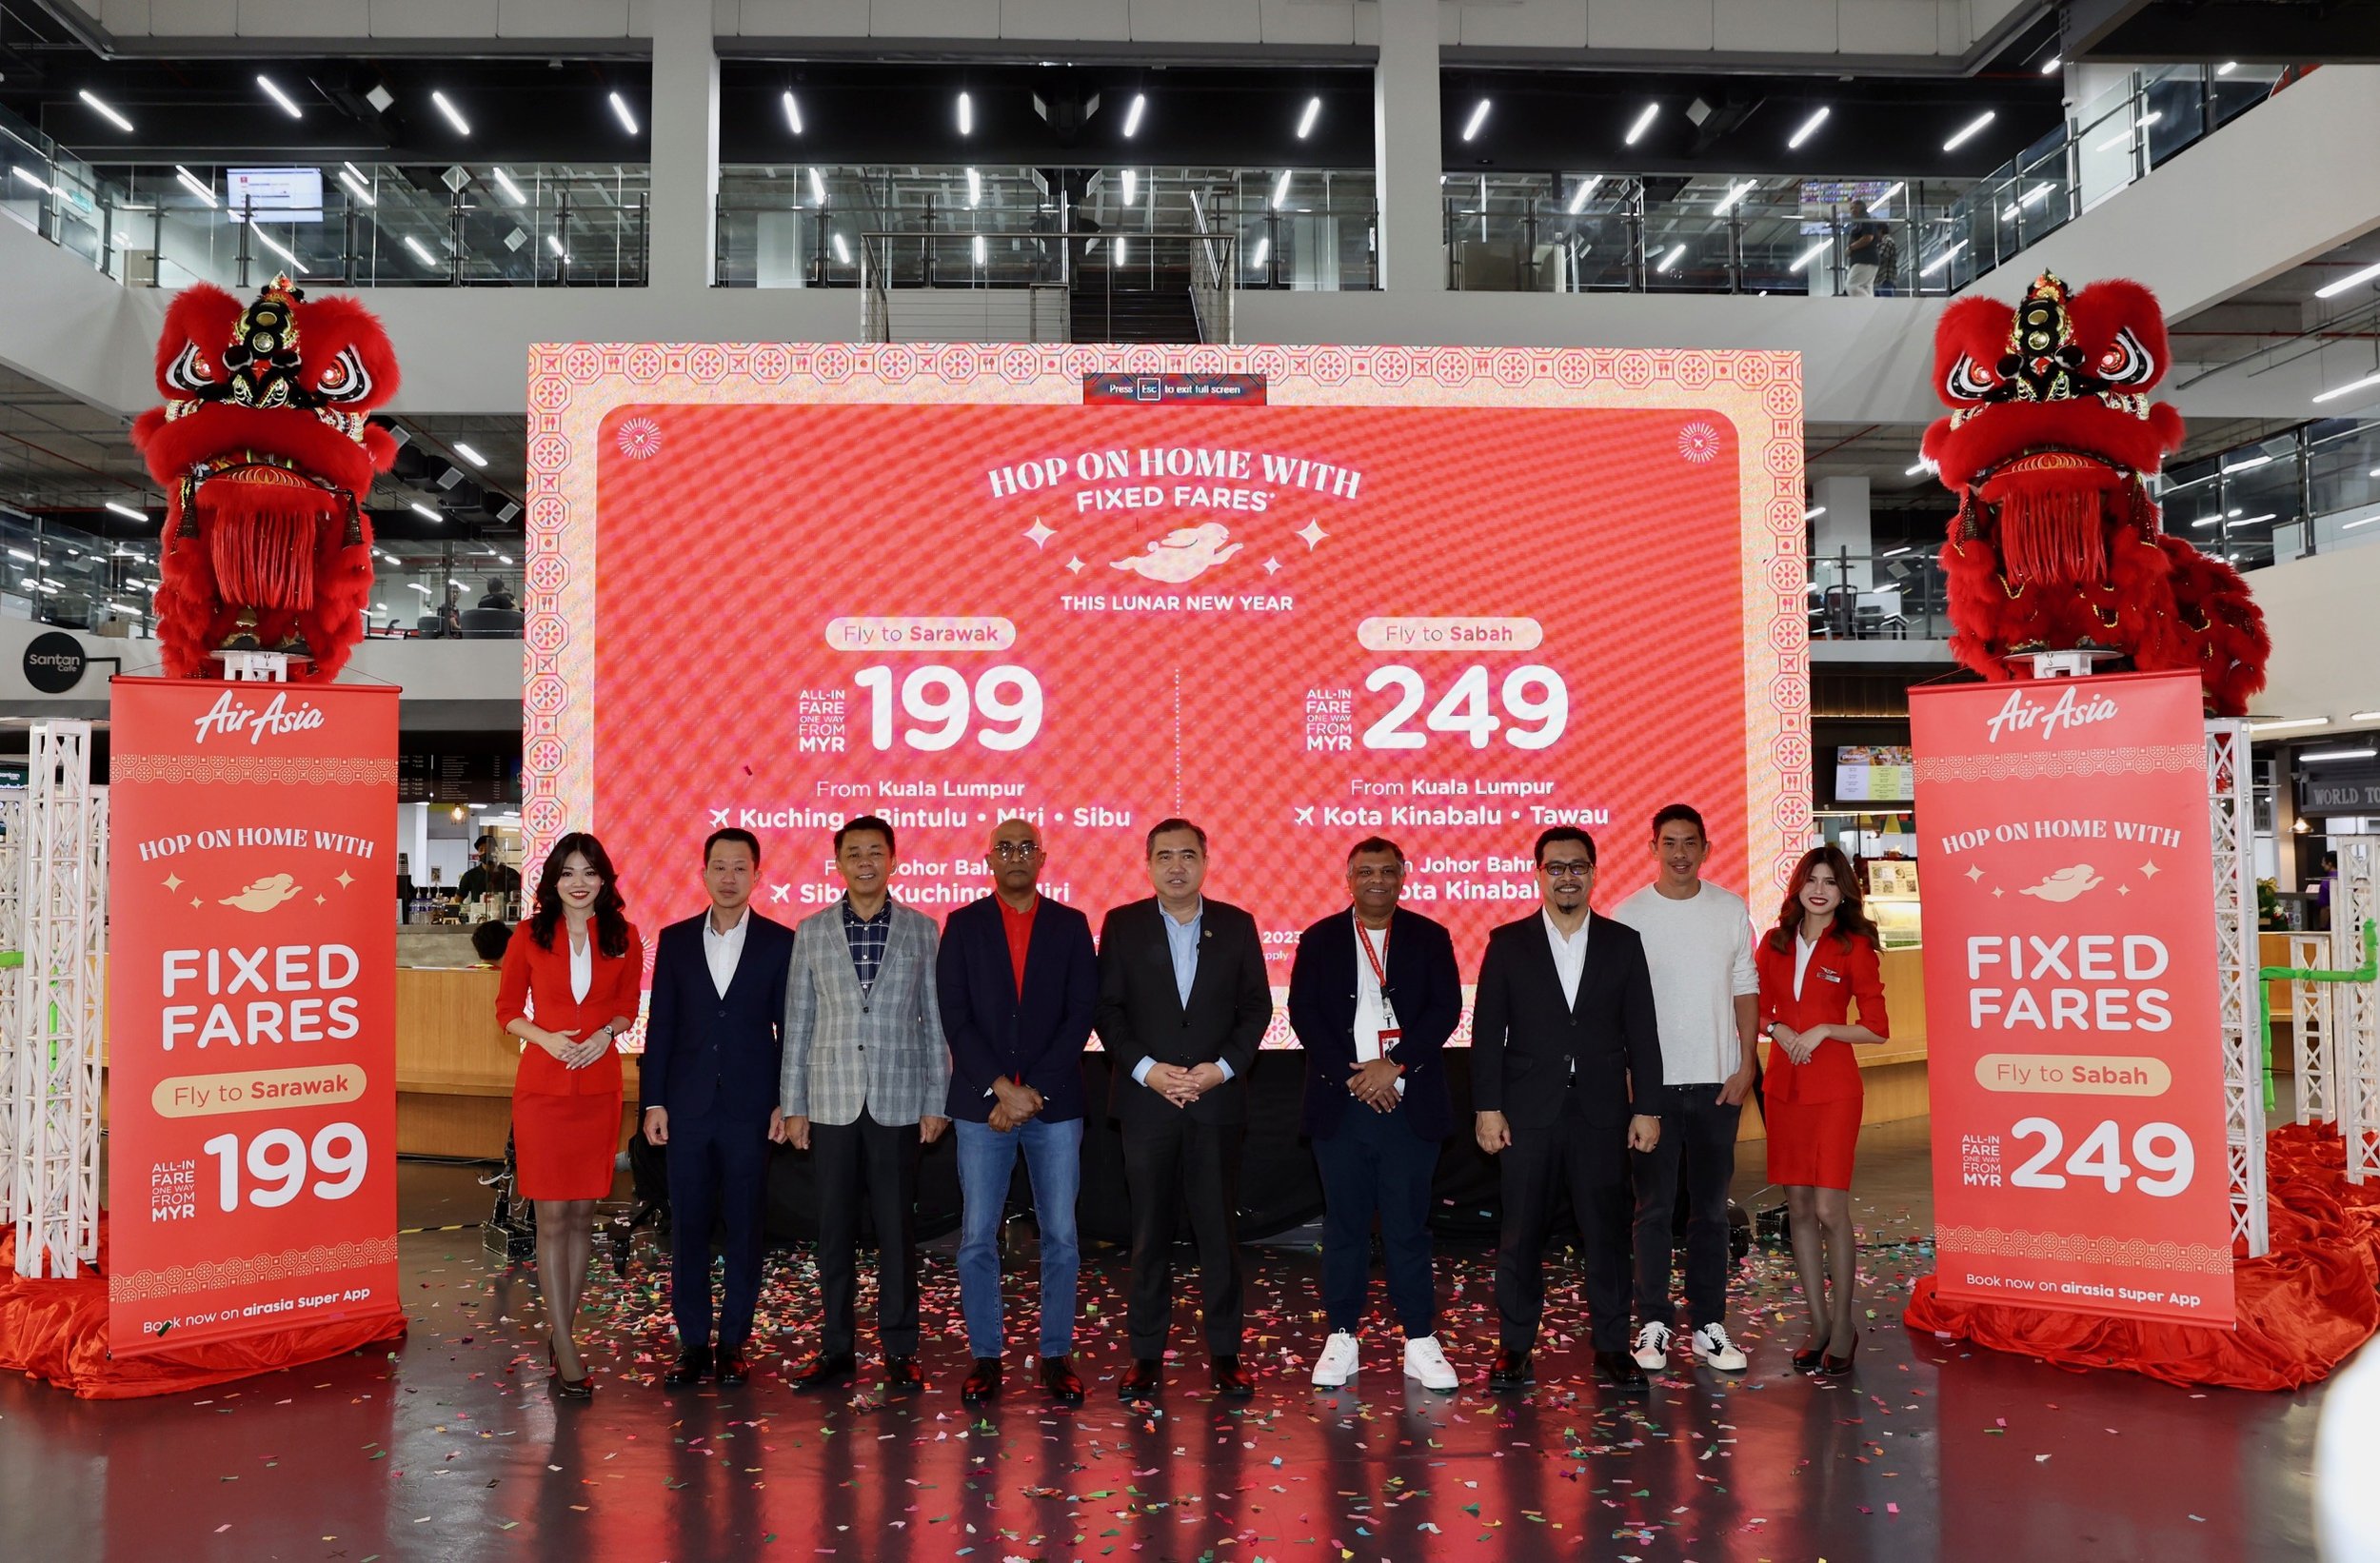   Photo Caption:  (Second from left) Datuk Captain Chester Voo Chee Soon, CEO of Civil Aviation Authority of Malaysia (CAAM); Tan Sri Mohd Khairul Adib Bin Abd Rahman, Chairman of CAAM; Bo Lingam, Group CEO of AirAsia Aviation Group Limited; YB Antho